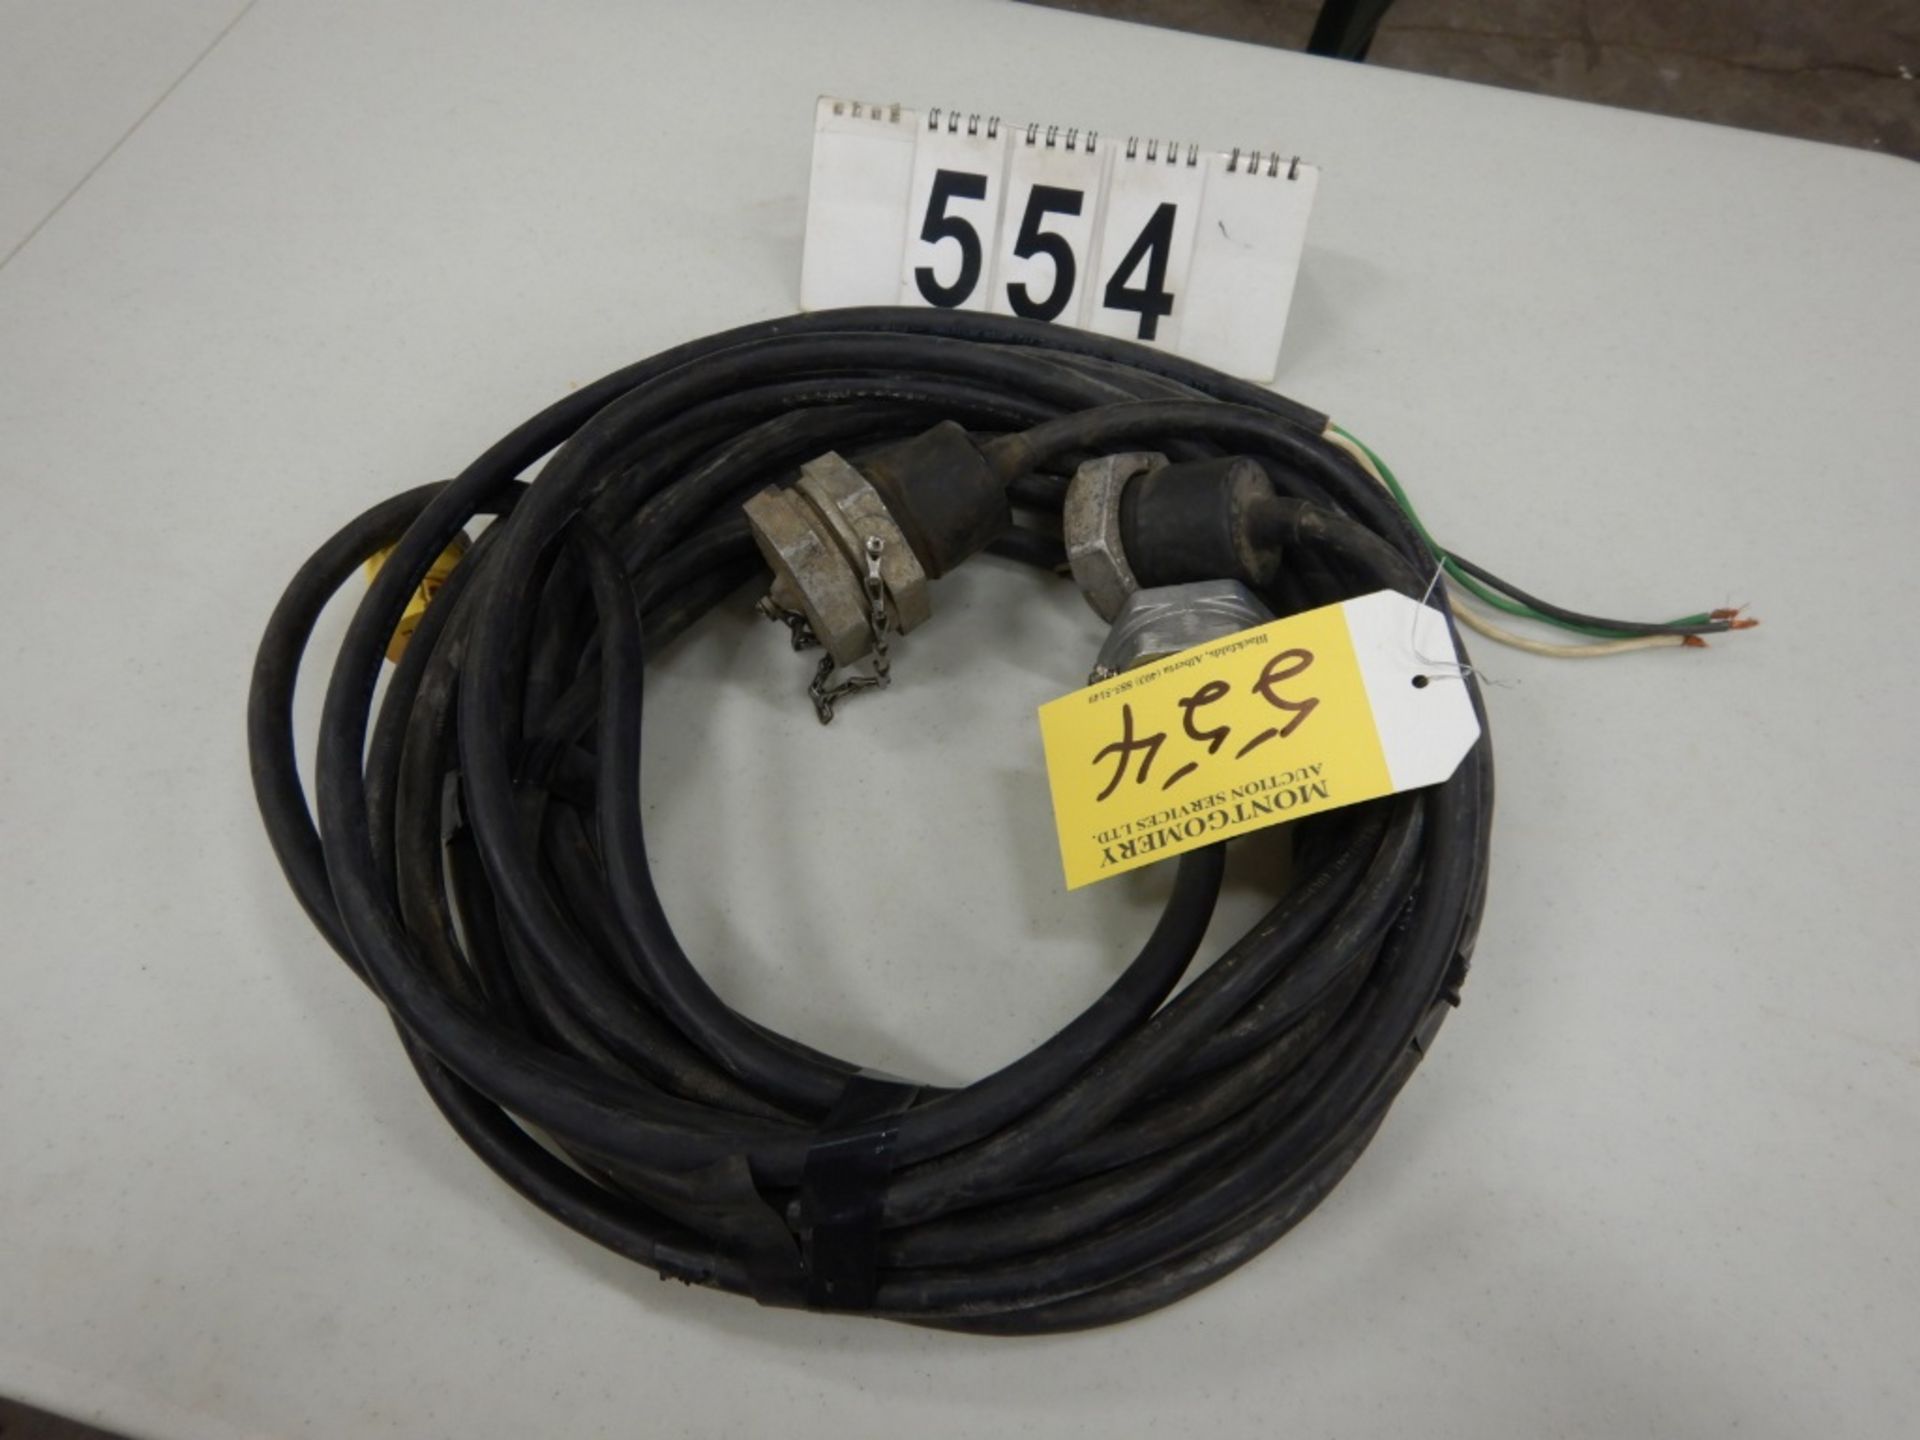 120 VOLT AC ELECTRICAL POWER CORD W/FITTINGS